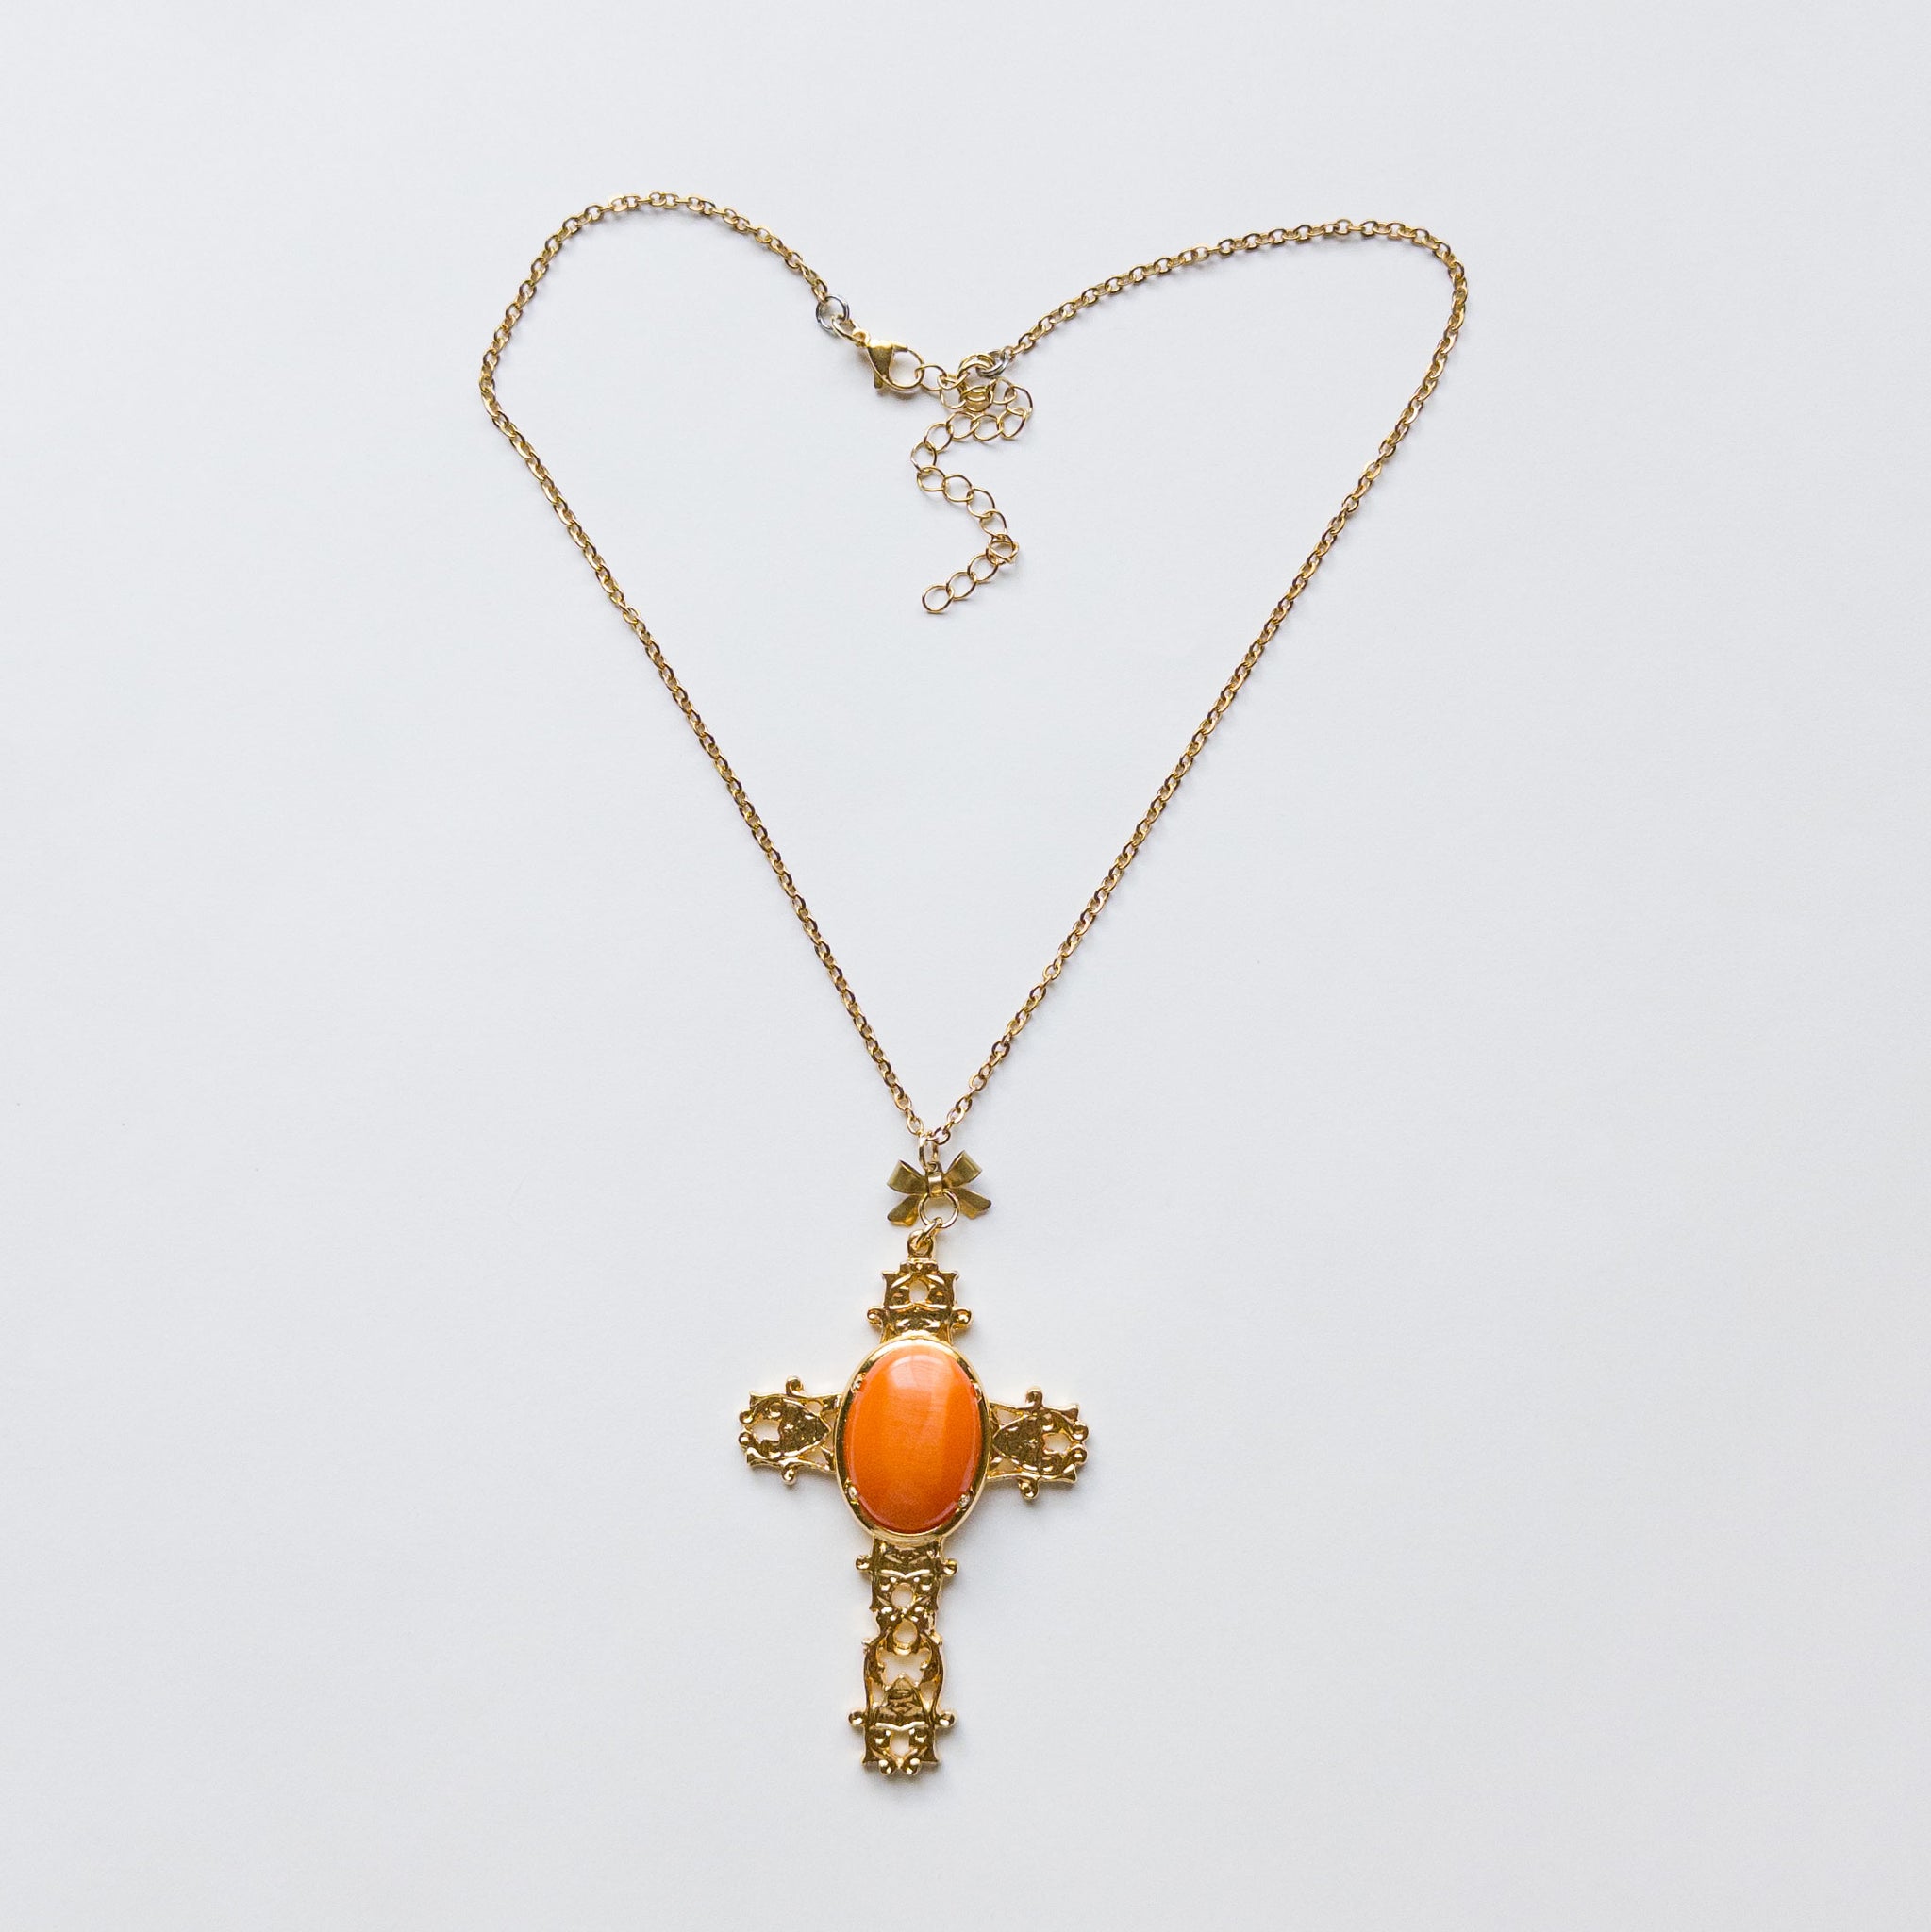 Large gold-plated cross pendant featuring an orange hue onyx stone in the center. gothic catholic ornate